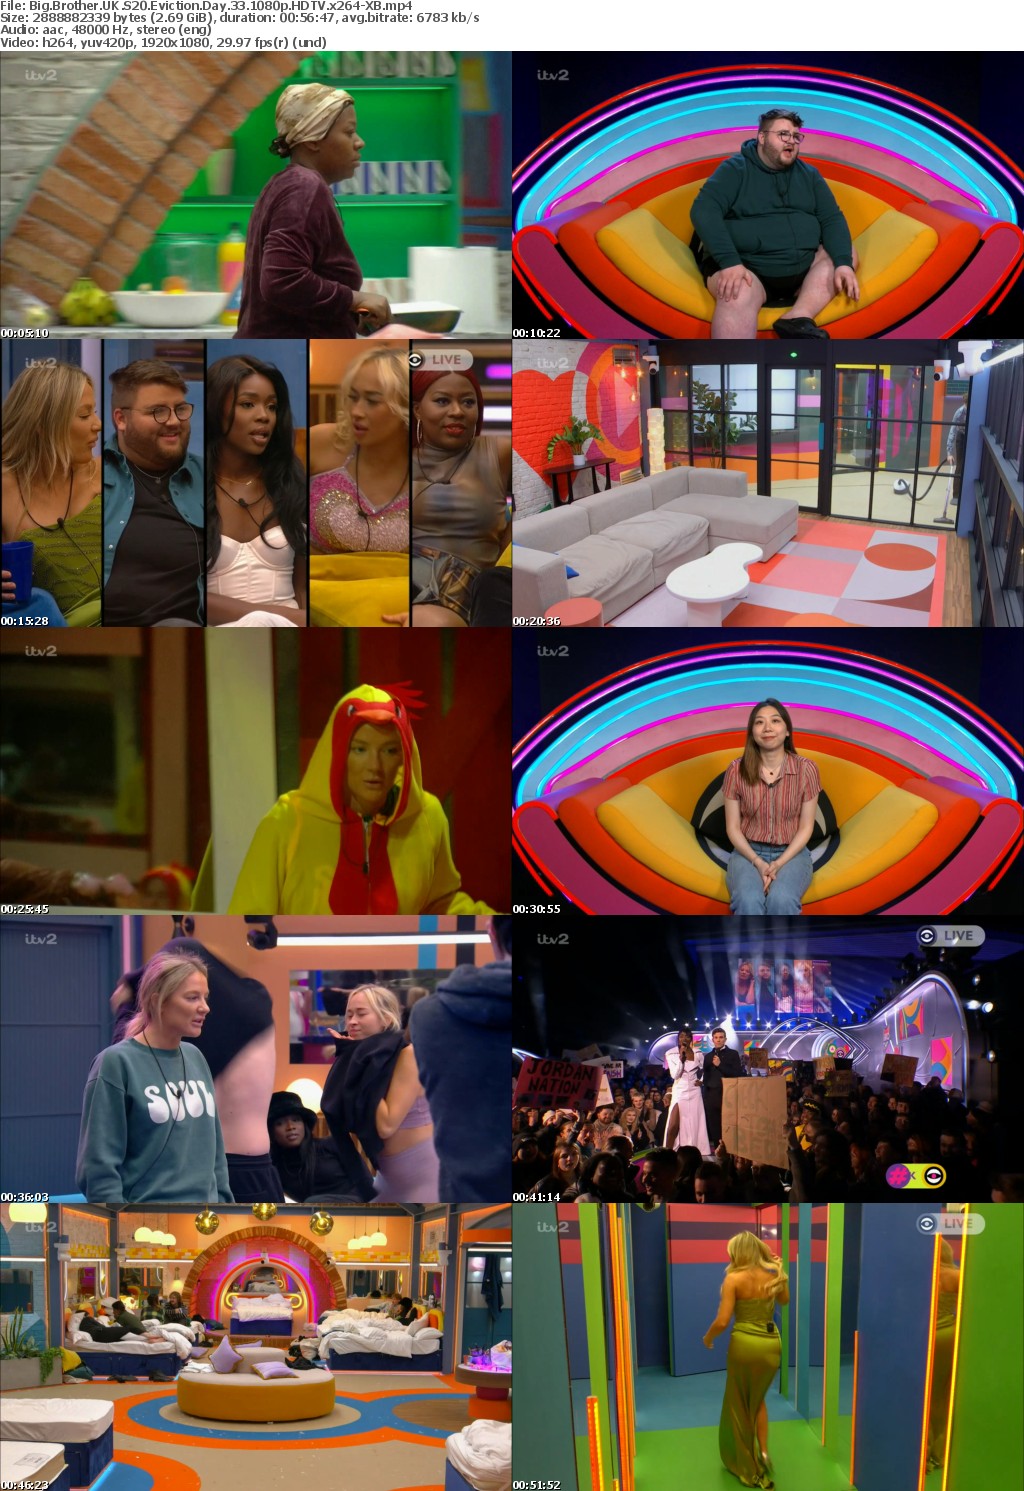 Big Brother UK S20 Eviction Day 33 1080p HDTV x264-XB